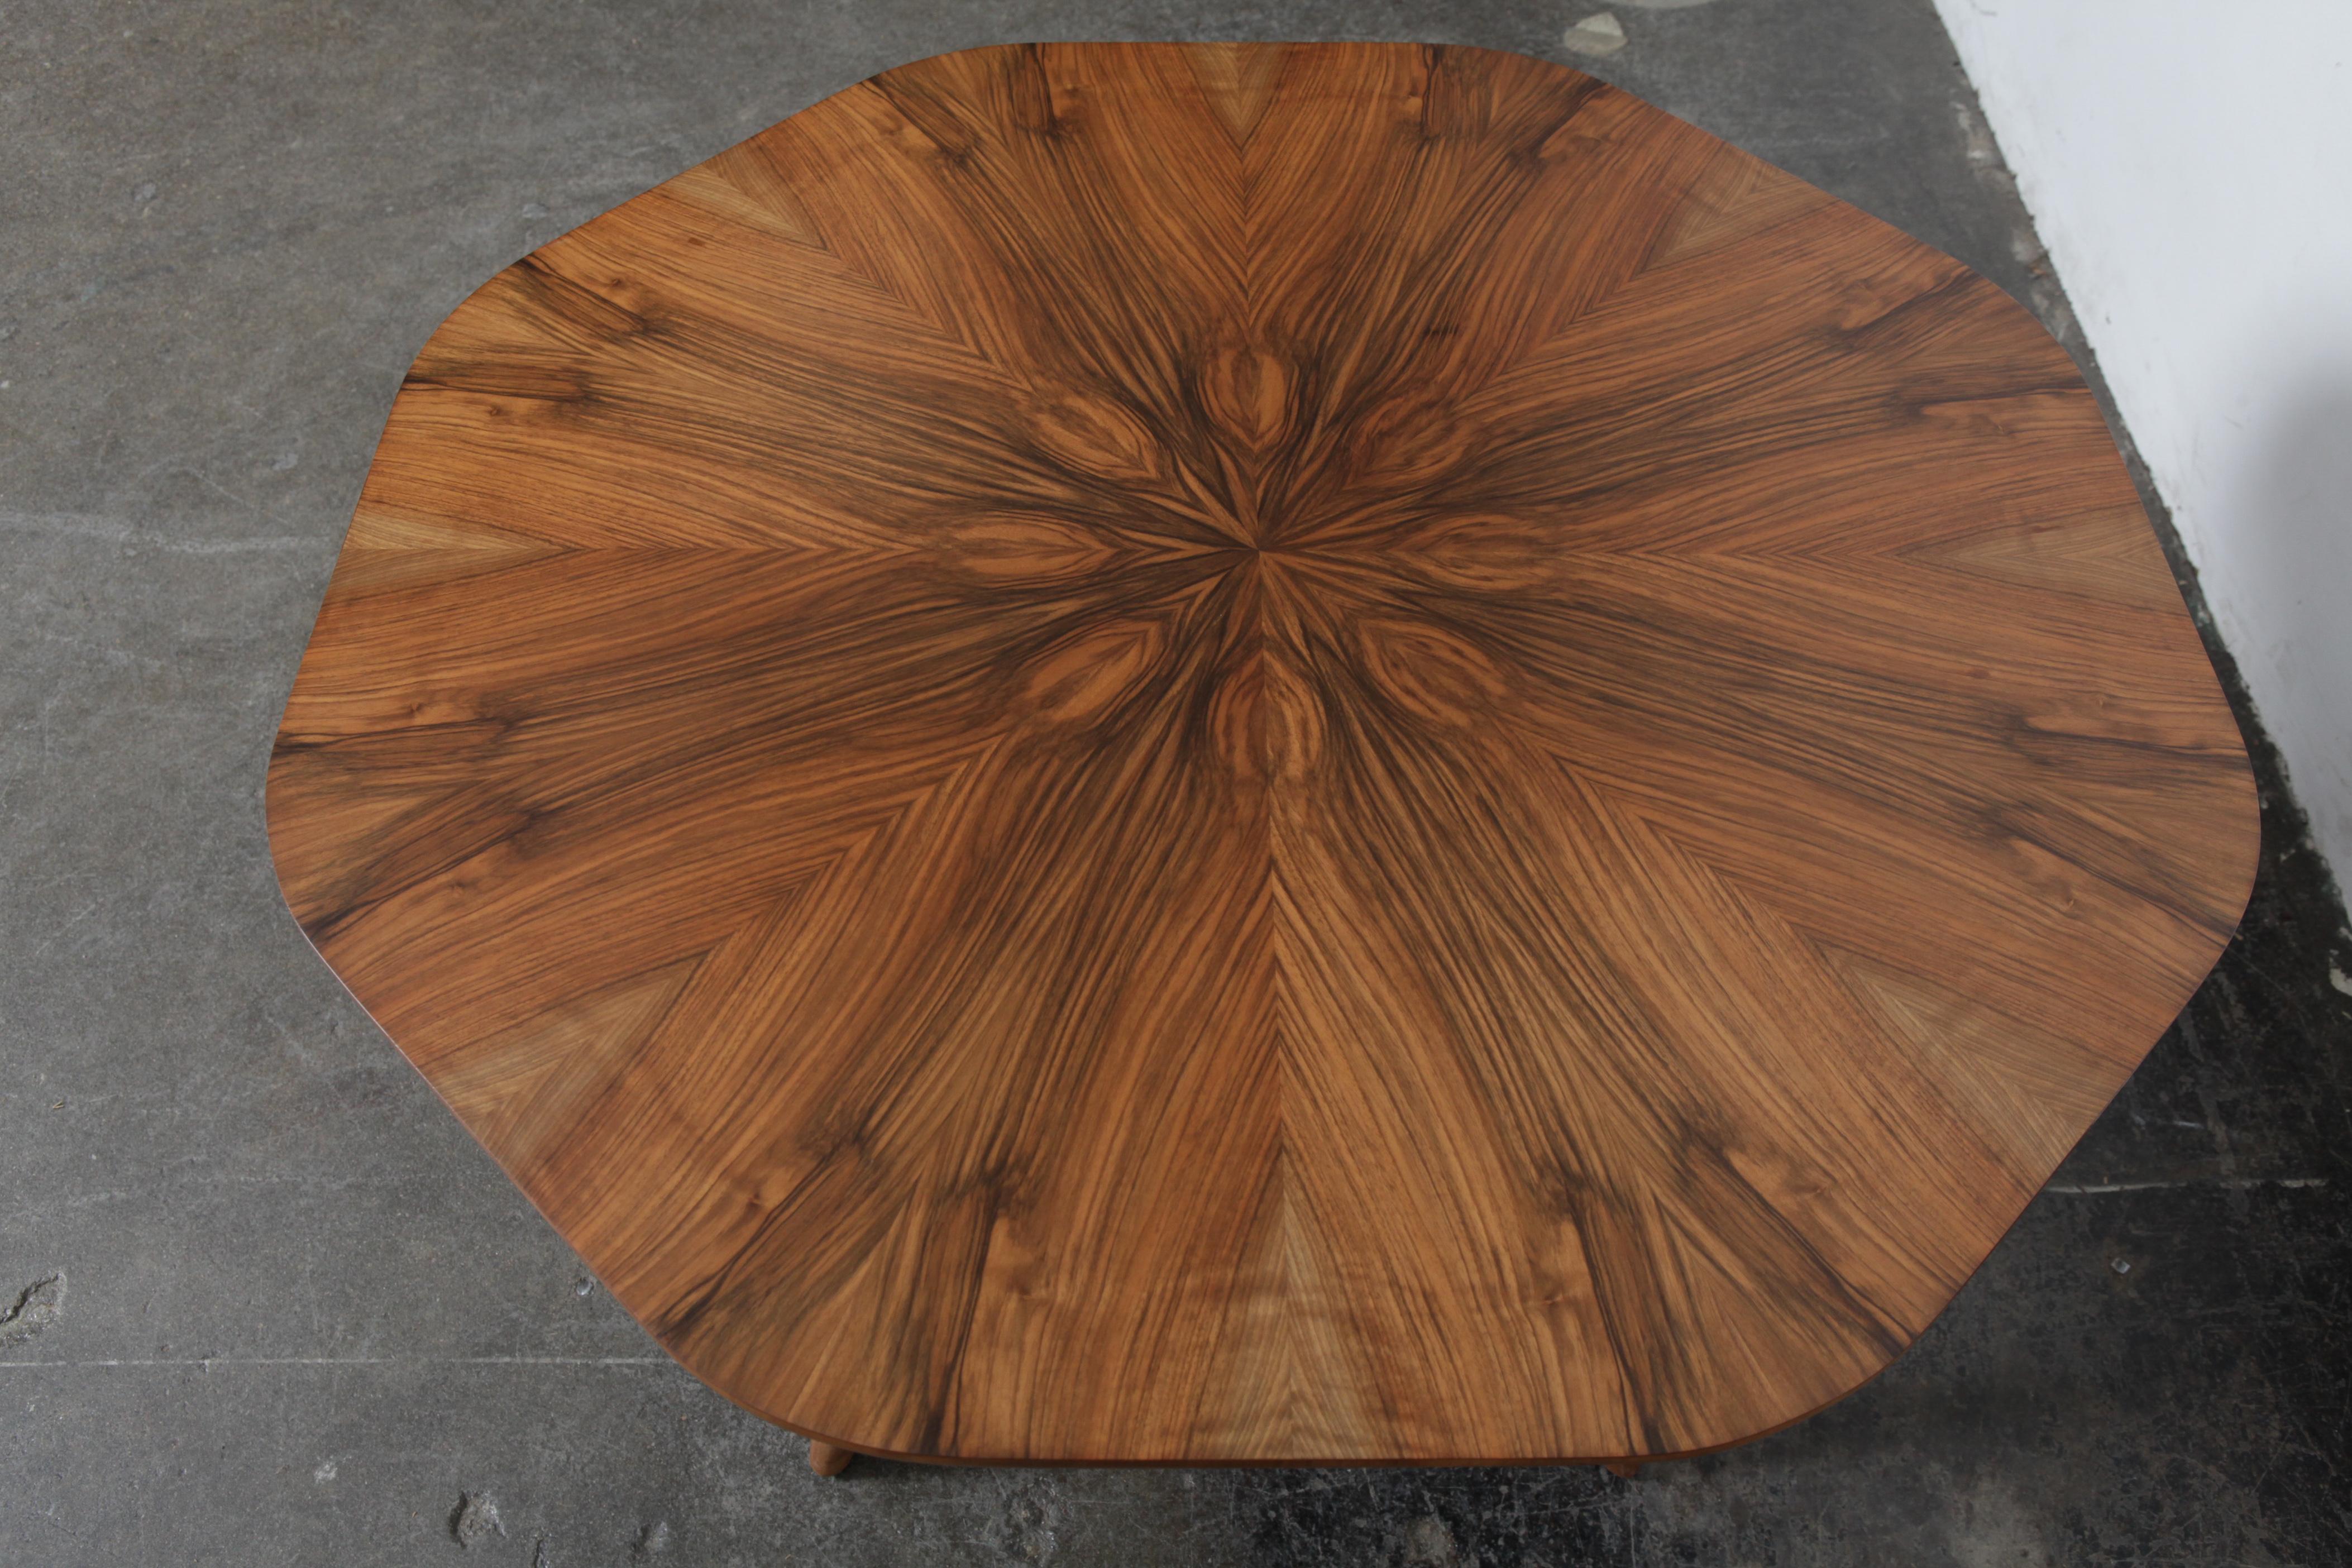 Swedish 1950s rosewood octagonal coffee table with beautiful sunburst grain pattern and cross support base, newly refinished in lacquer.